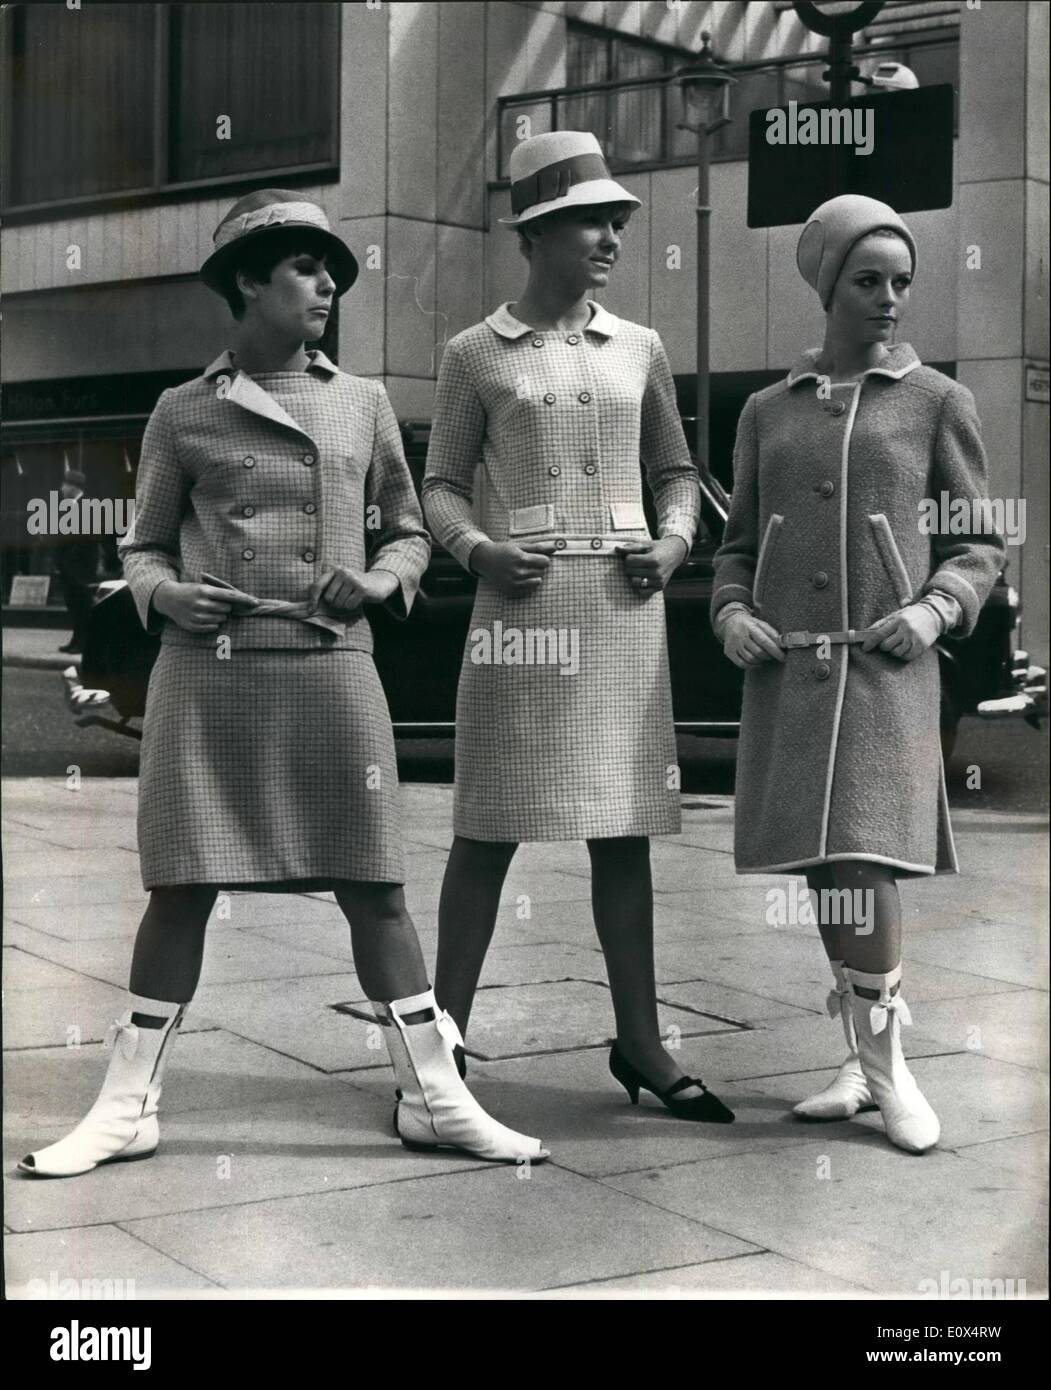 Apr. 04, 1965 - London Fashion Week: The 13th. London Fashion Week - organised by the Fashion House Group of London - opened today at the Hilton Hotel. Photo shows (L to R) : Judith Porteous, wears a Turquoise check and plain pure wool dress and matching double breasted jacket; Sandra Newman wears a double breasted dress with long sleeves in a ''Winter White'' matching check and plain pure wool - and Felicity Downer wears a sand-coloured coat, edged white wool and white leather belt - by Cojana. Judith Porteous' outfit and Sandra Newman' are by Wendy Dress. Stock Photo